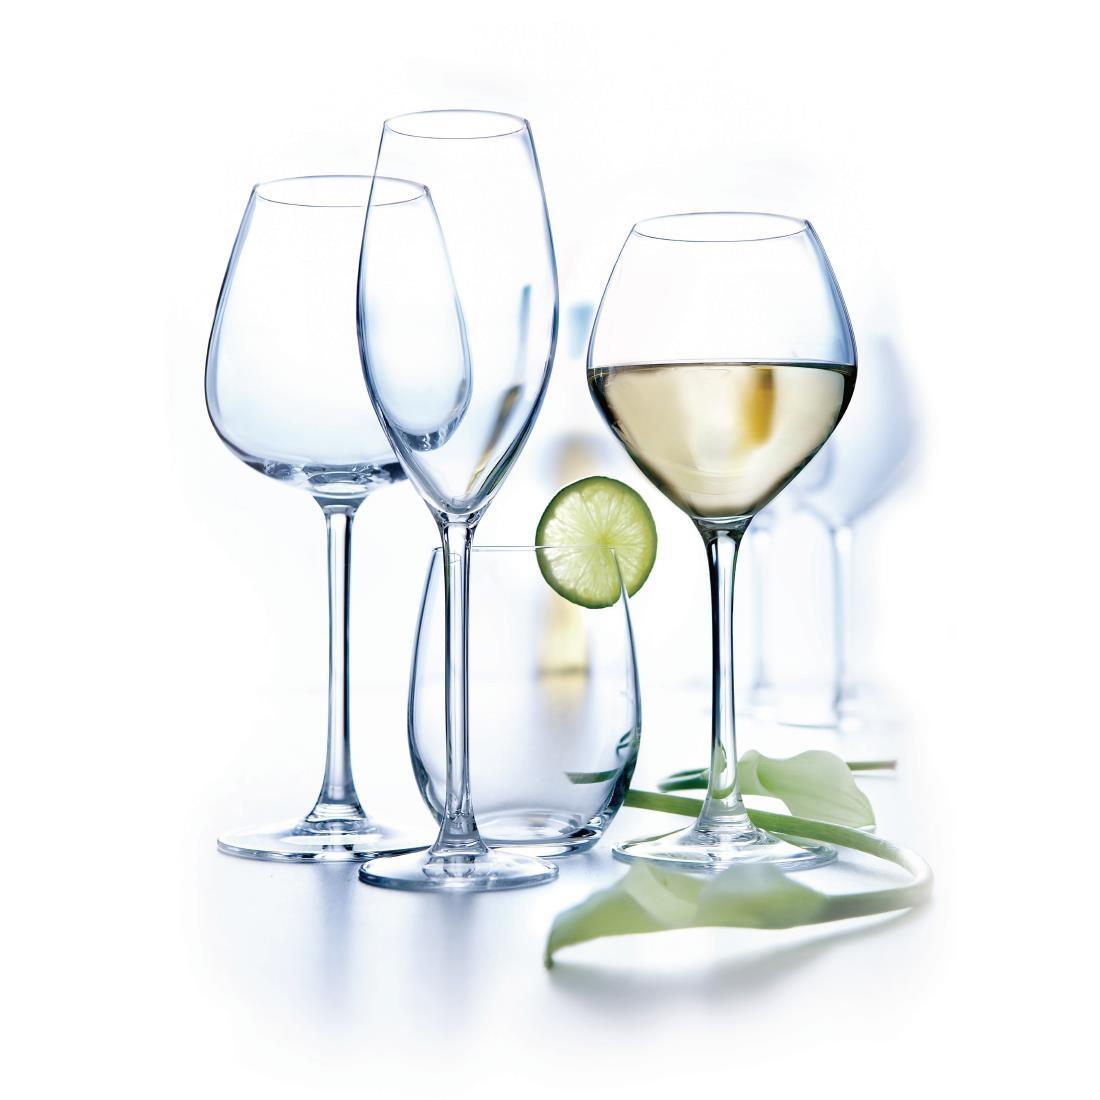 Arcoroc Grand Cepages White Wine Glasses 470ml (Pack of 12) - DH853  - 2